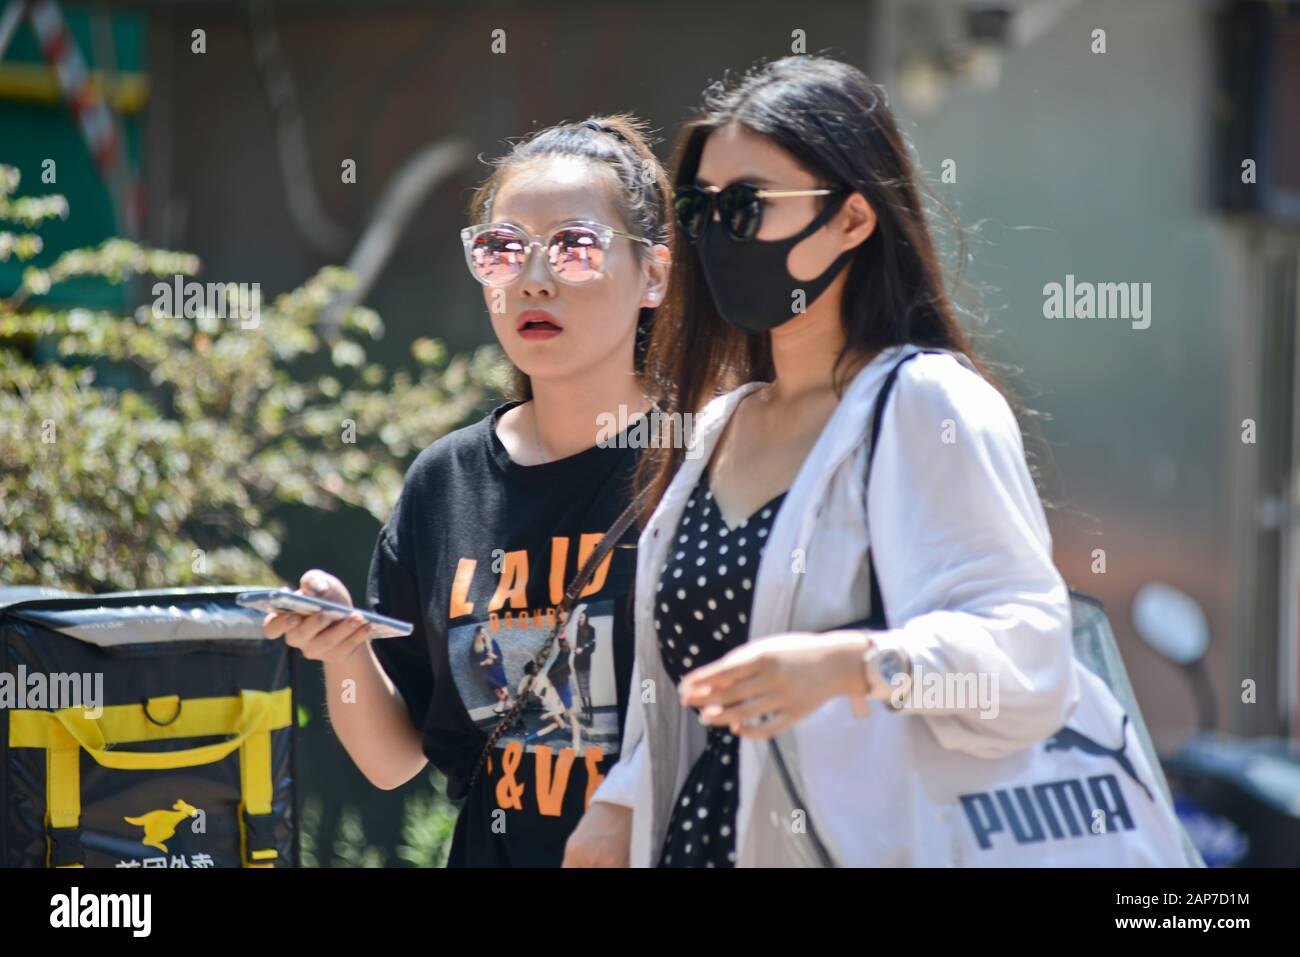 Wuhan (China): spreading of the Covid-19 virus, also known as coronavirus. Chinese girls in Jianghan Road, one wearing a face mask Stock Photo